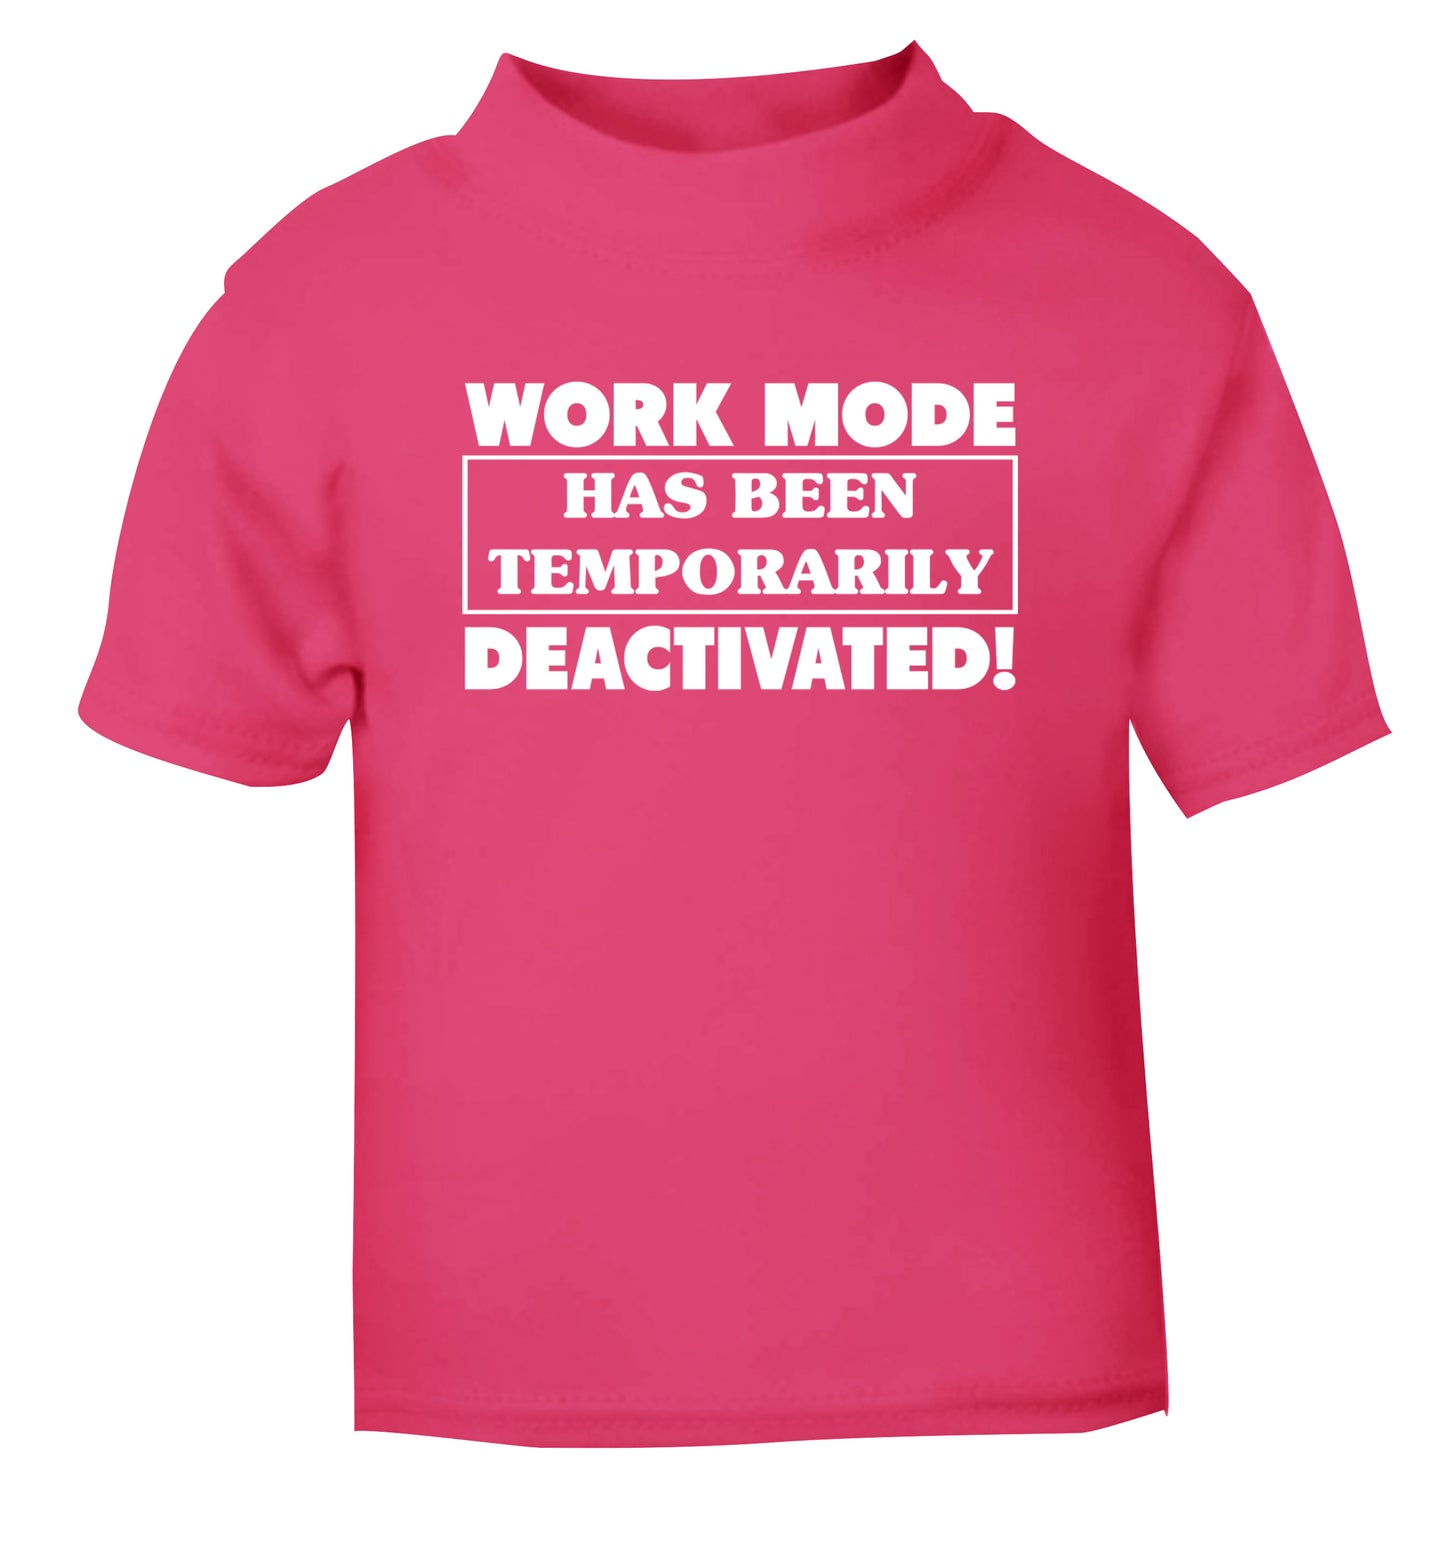 Work mode has now been temporarily deactivated pink Baby Toddler Tshirt 2 Years